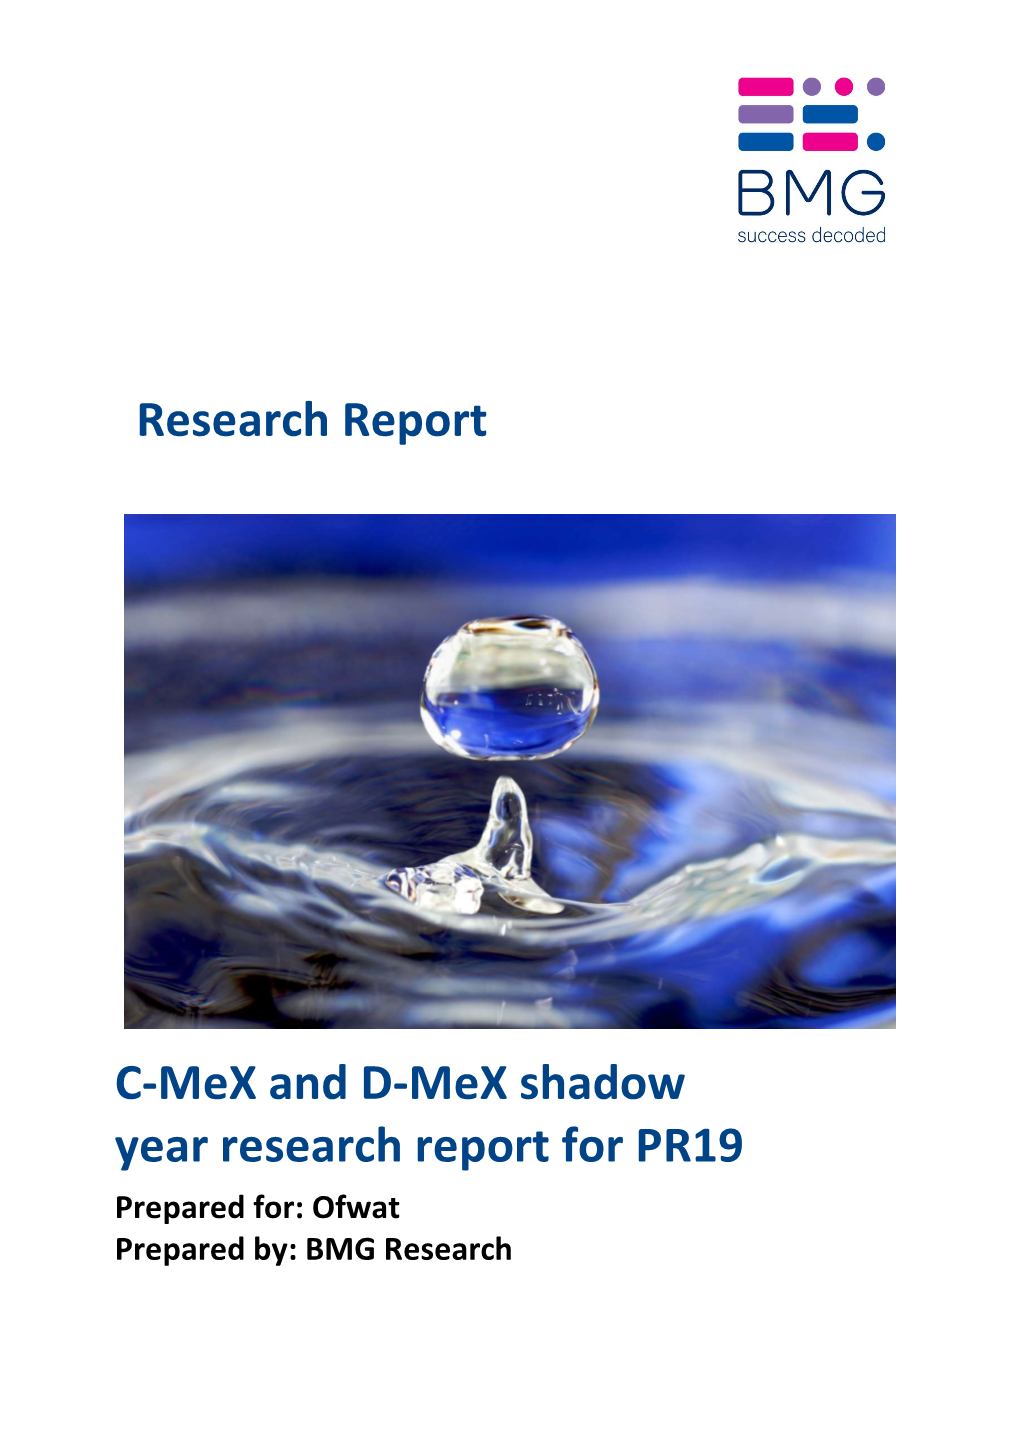 C-Mex and D-Mex Shadow Year Research Report for PR19 Prepared For: Ofwat Prepared By: BMG Research